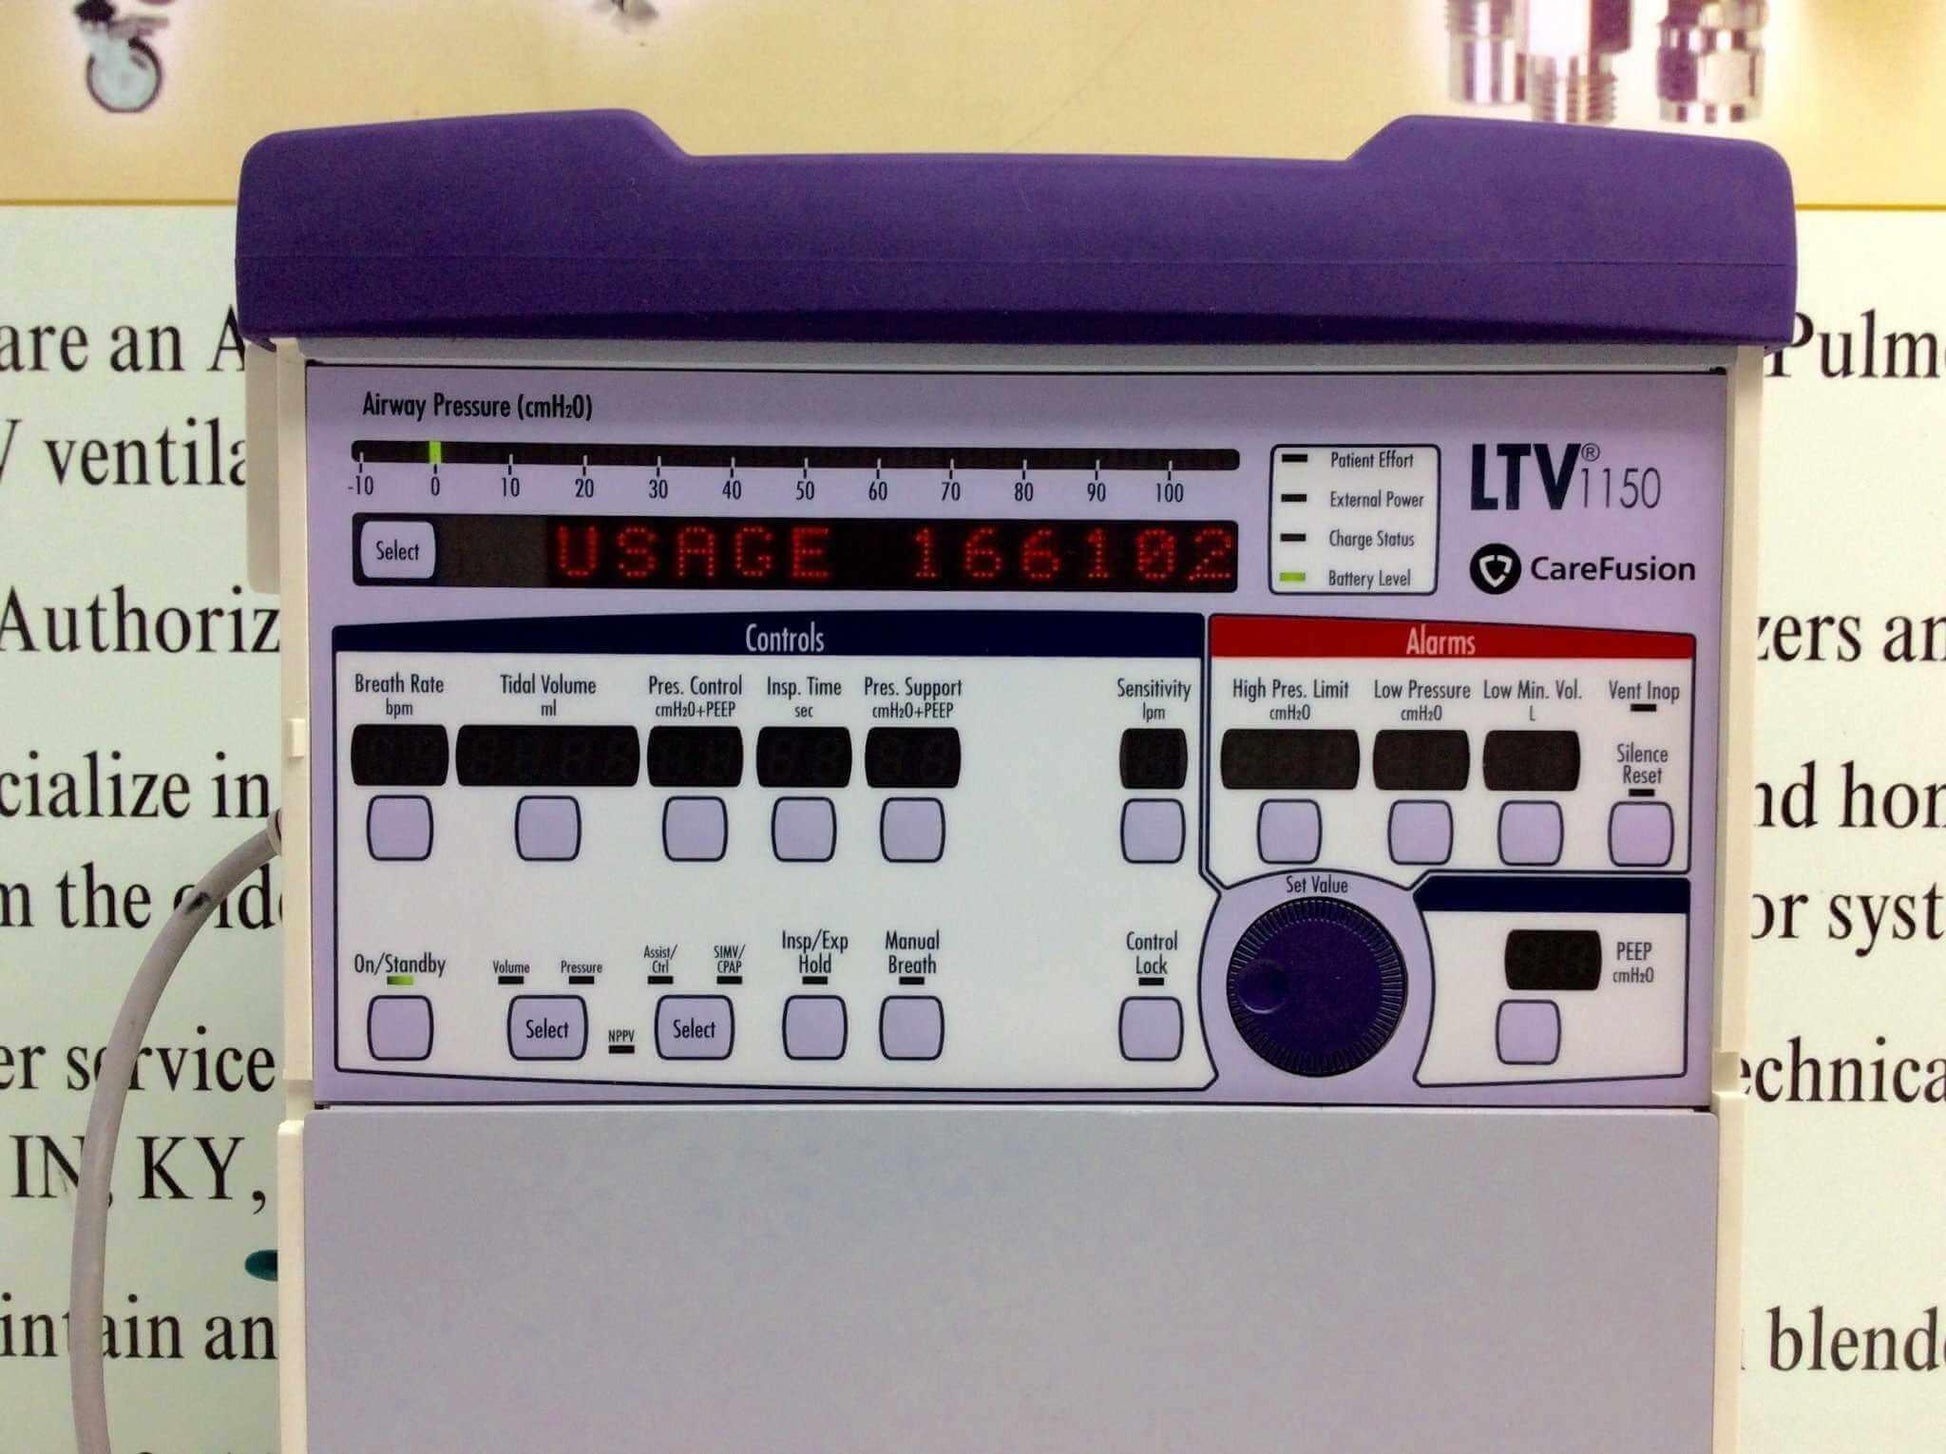 REFURBISHED Certified Patient Ready CareFusion LTV 1150 Ventilator with 24 Month Warranty - MBR Medicals